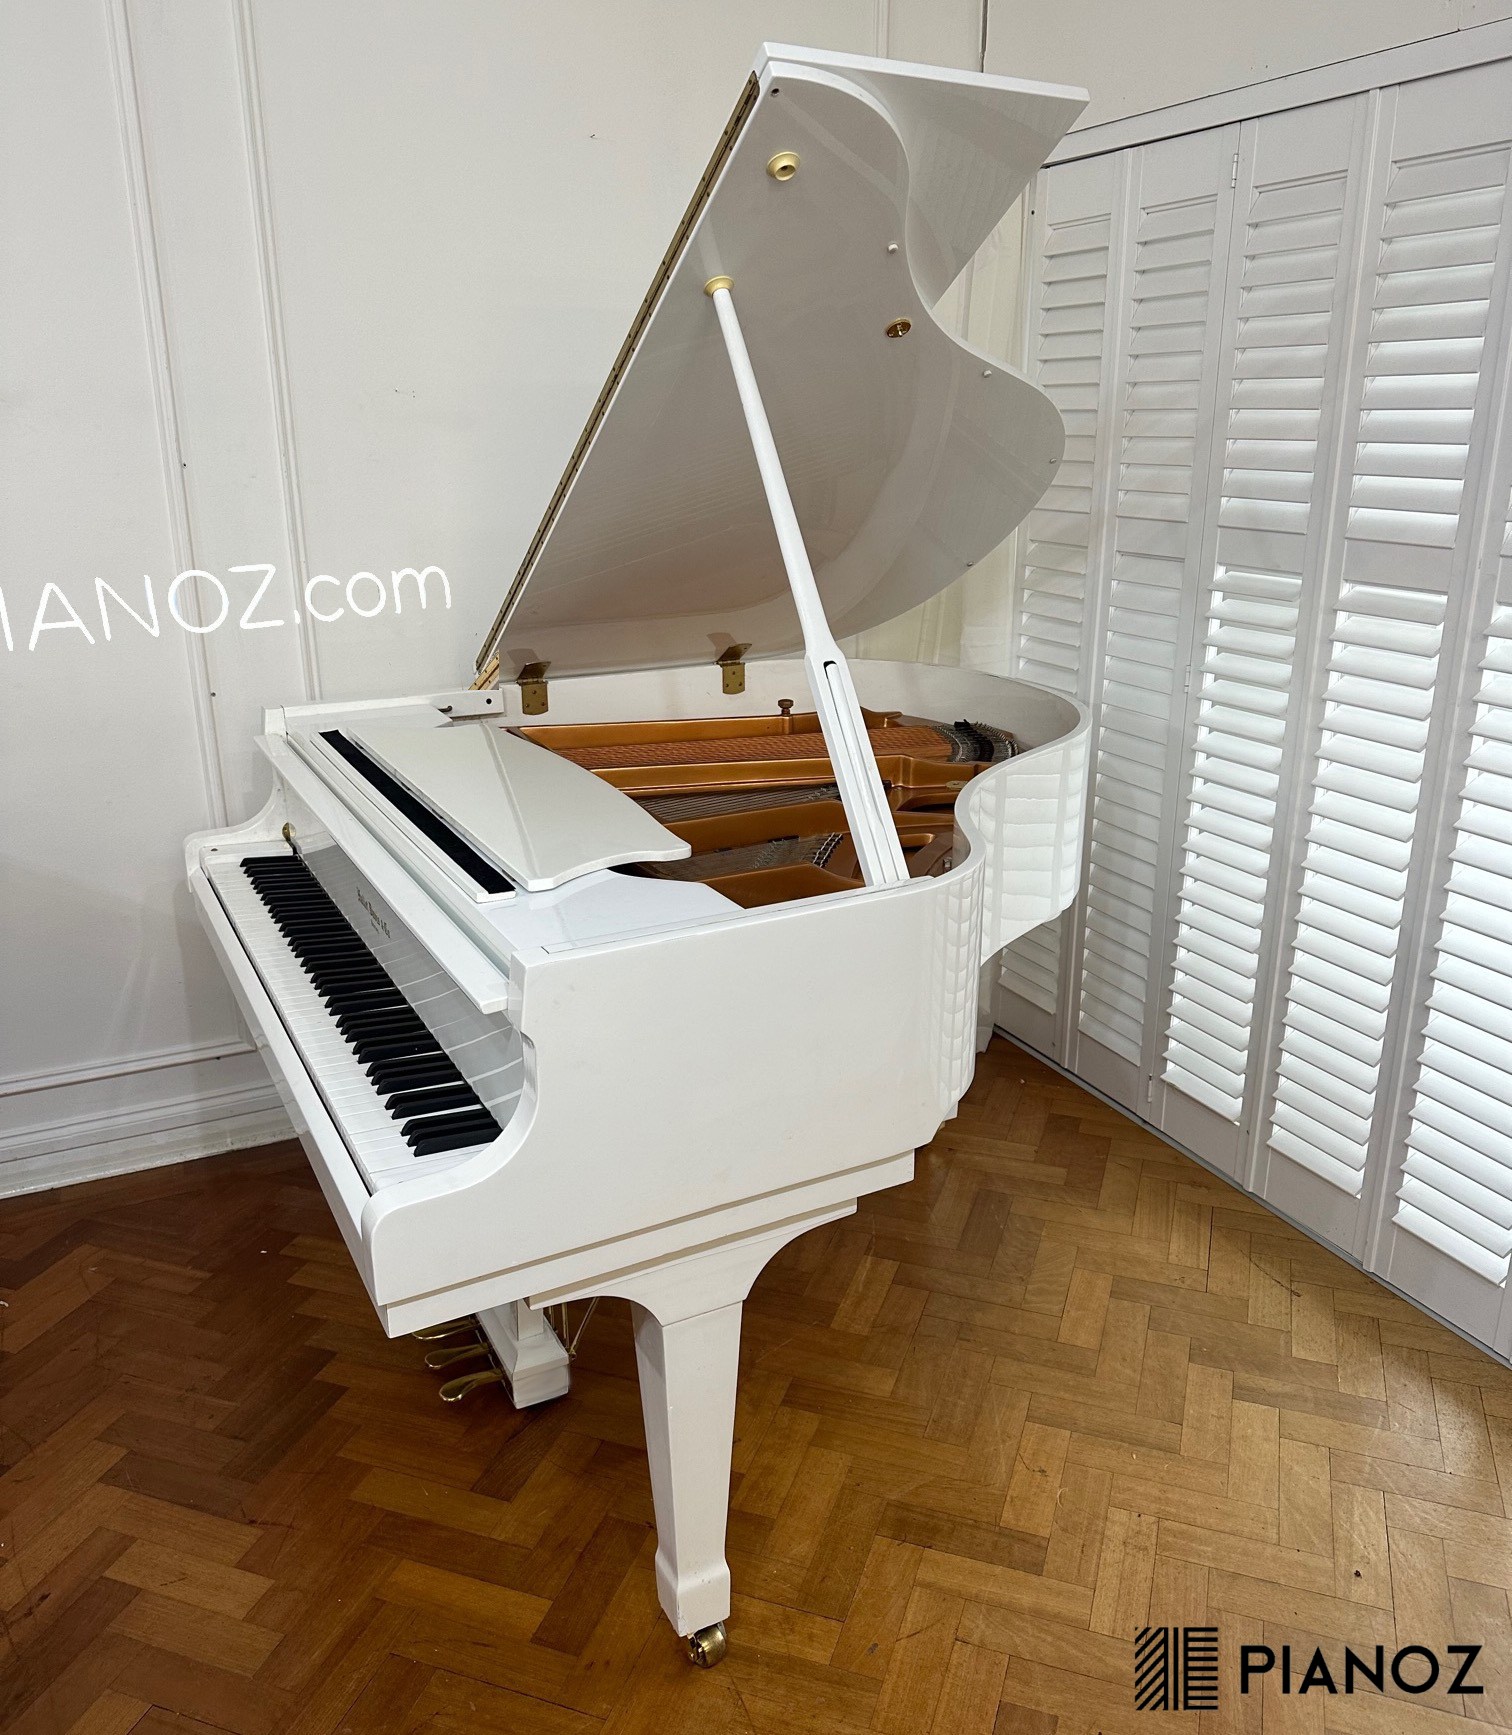 Hallet Davis White Self Playing Baby Grand Piano piano for sale in UK